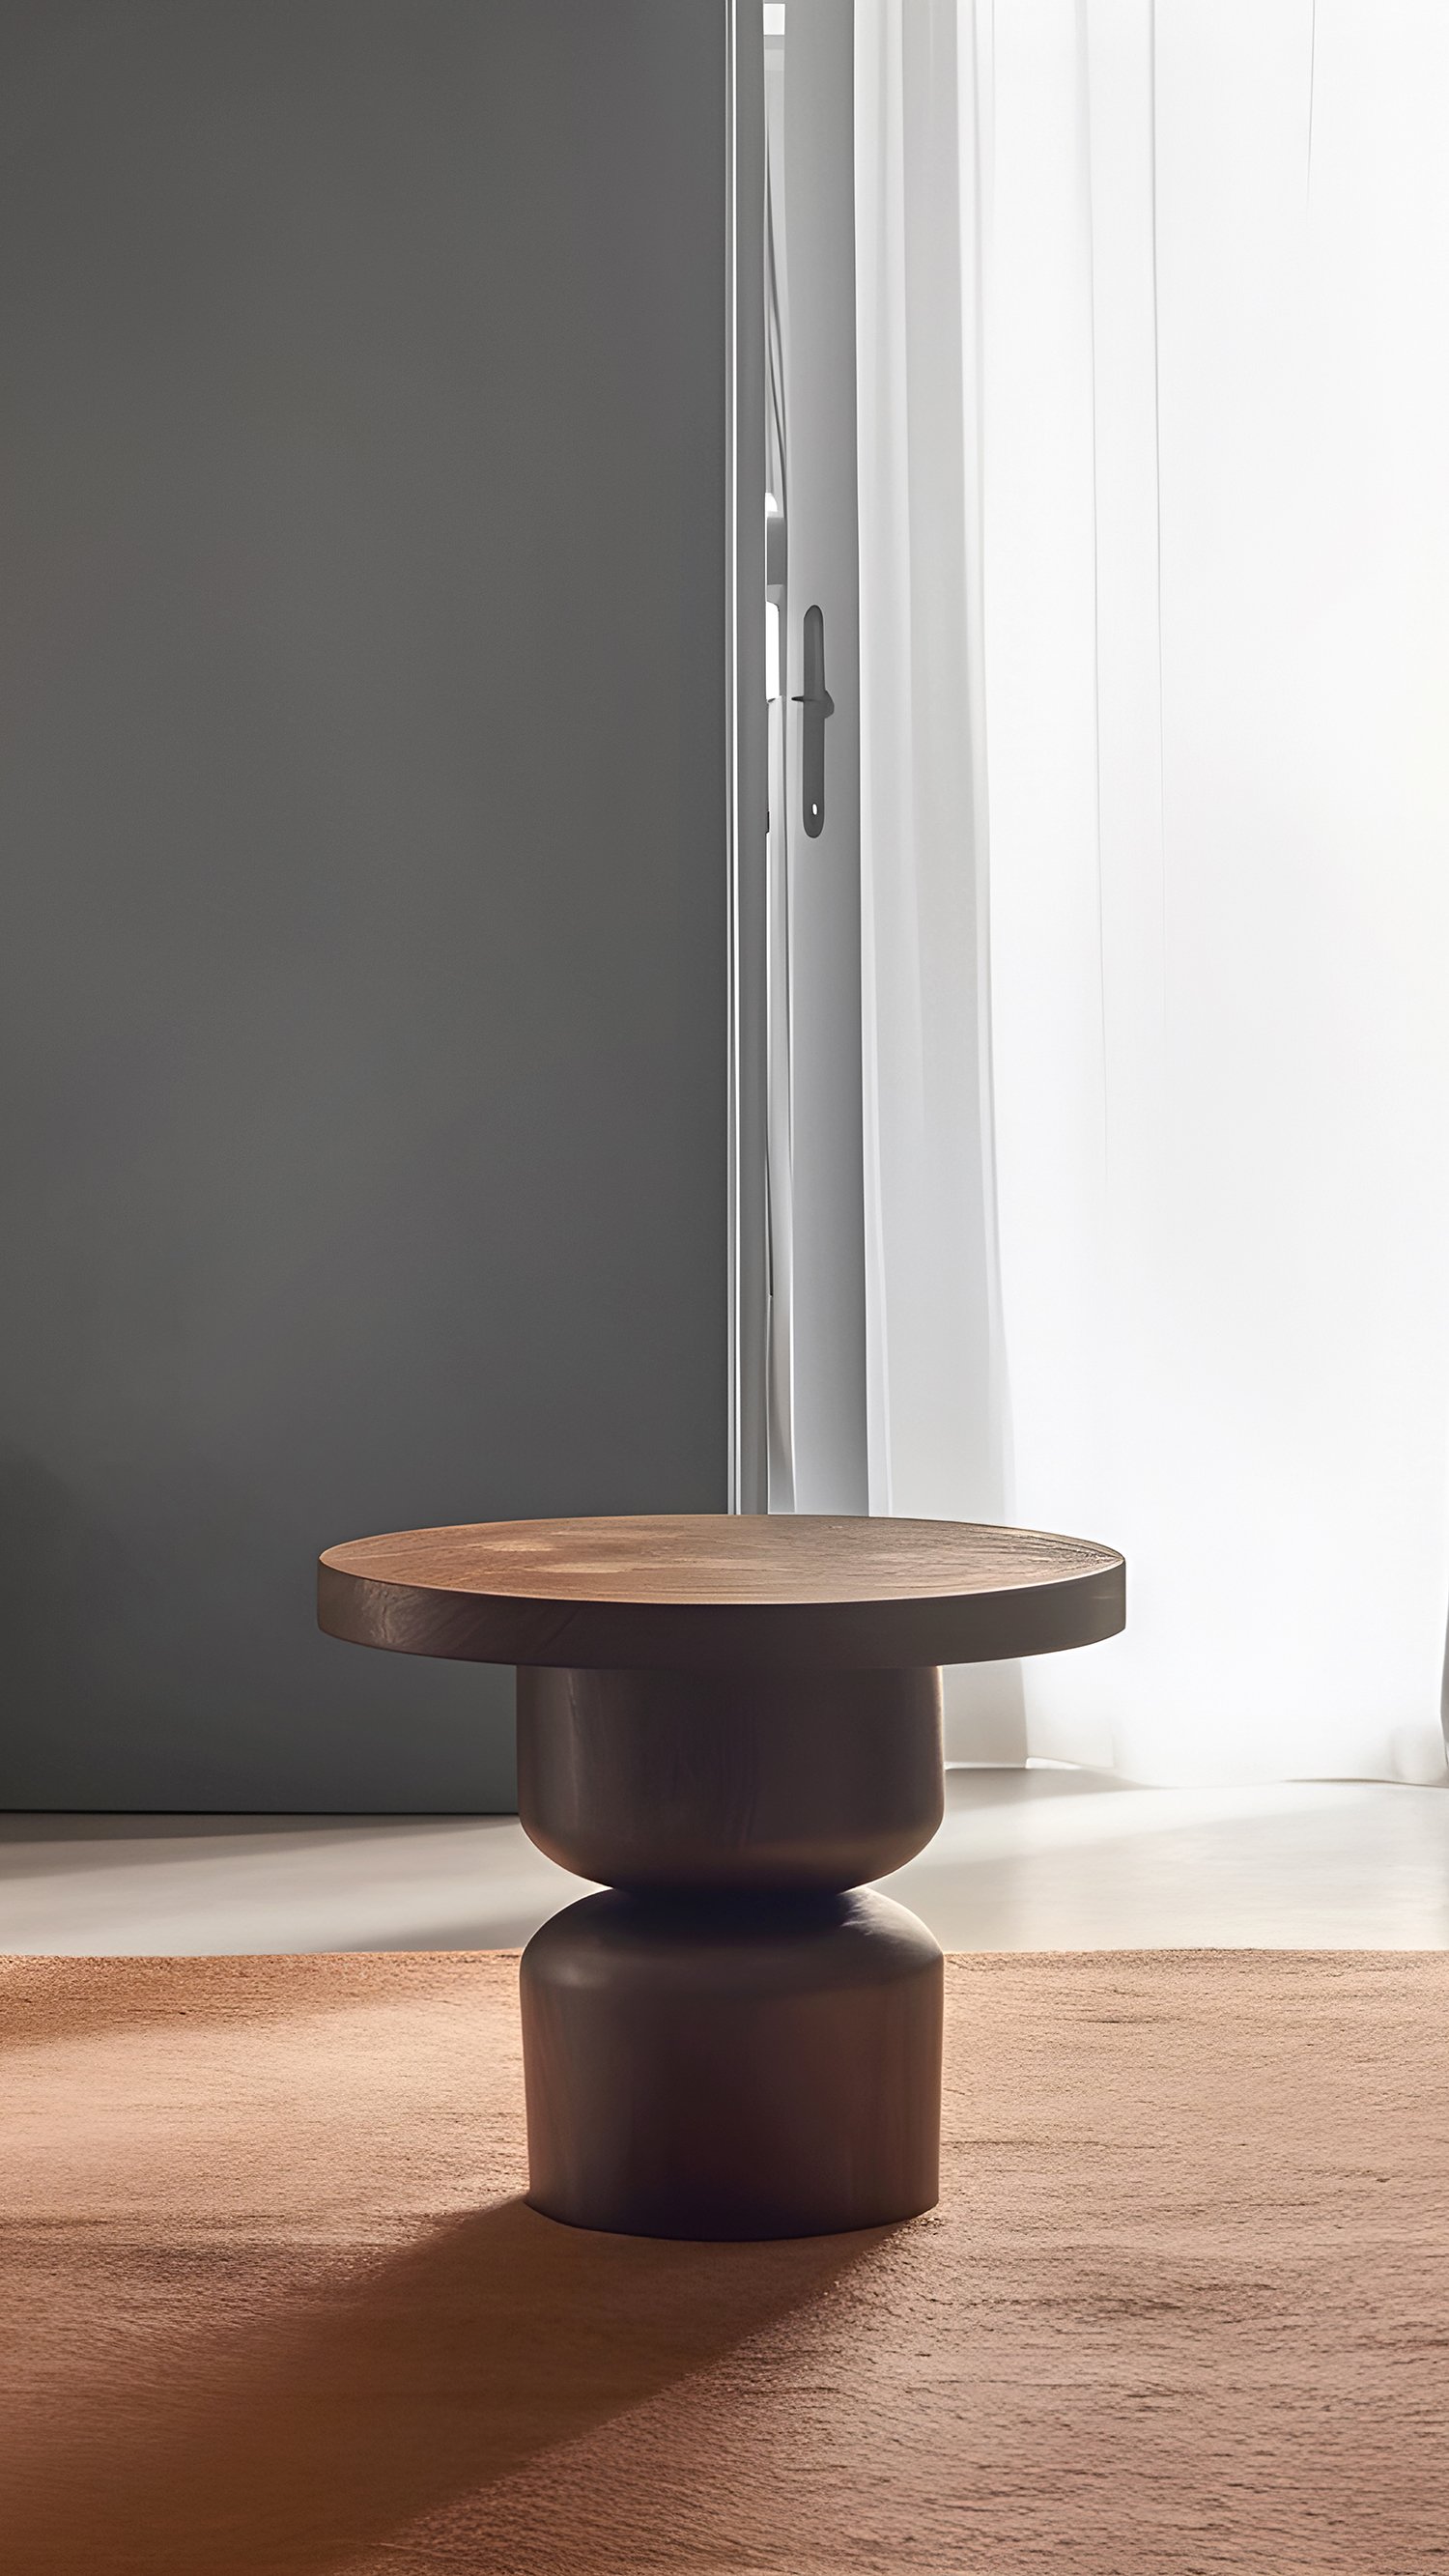 Socle 16 Side Table by Joel Escalona for NONO - 4.jpg